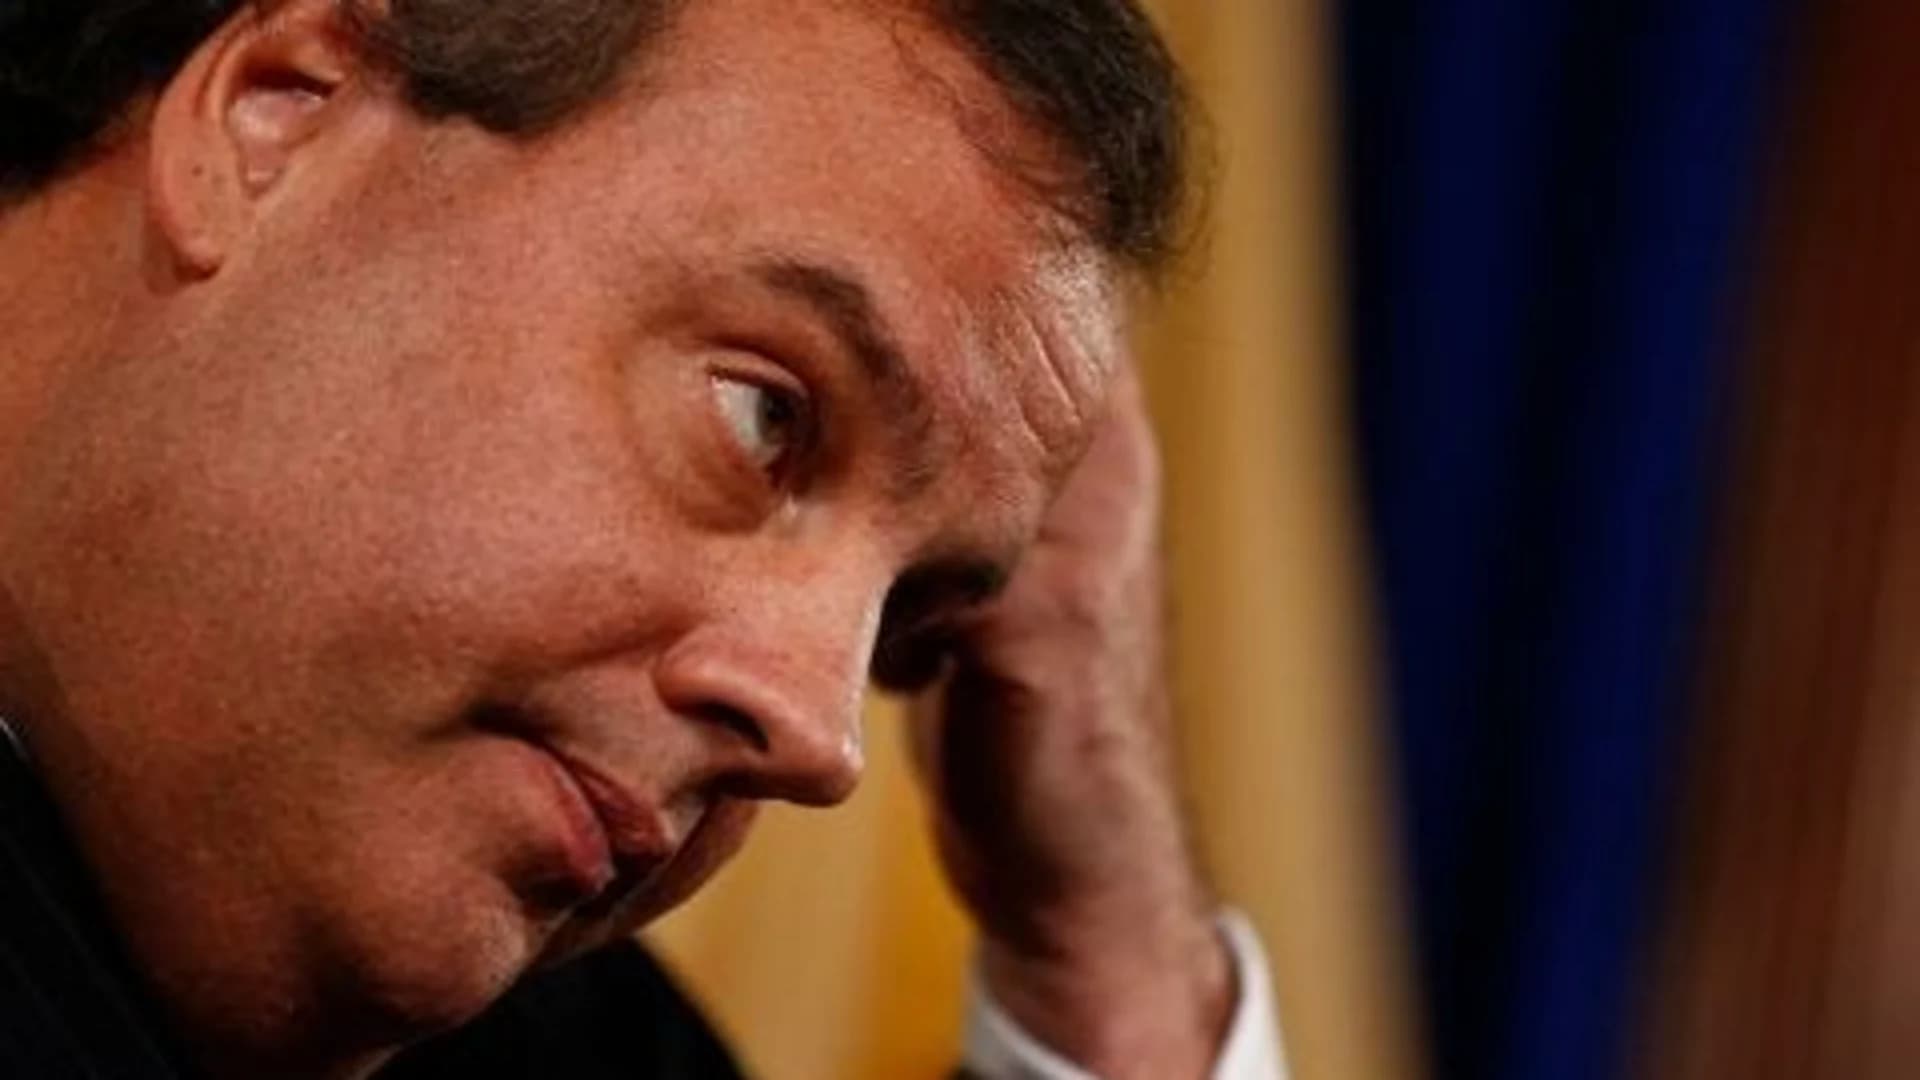 Gov. Chris Christie's approval rating falls to historic low